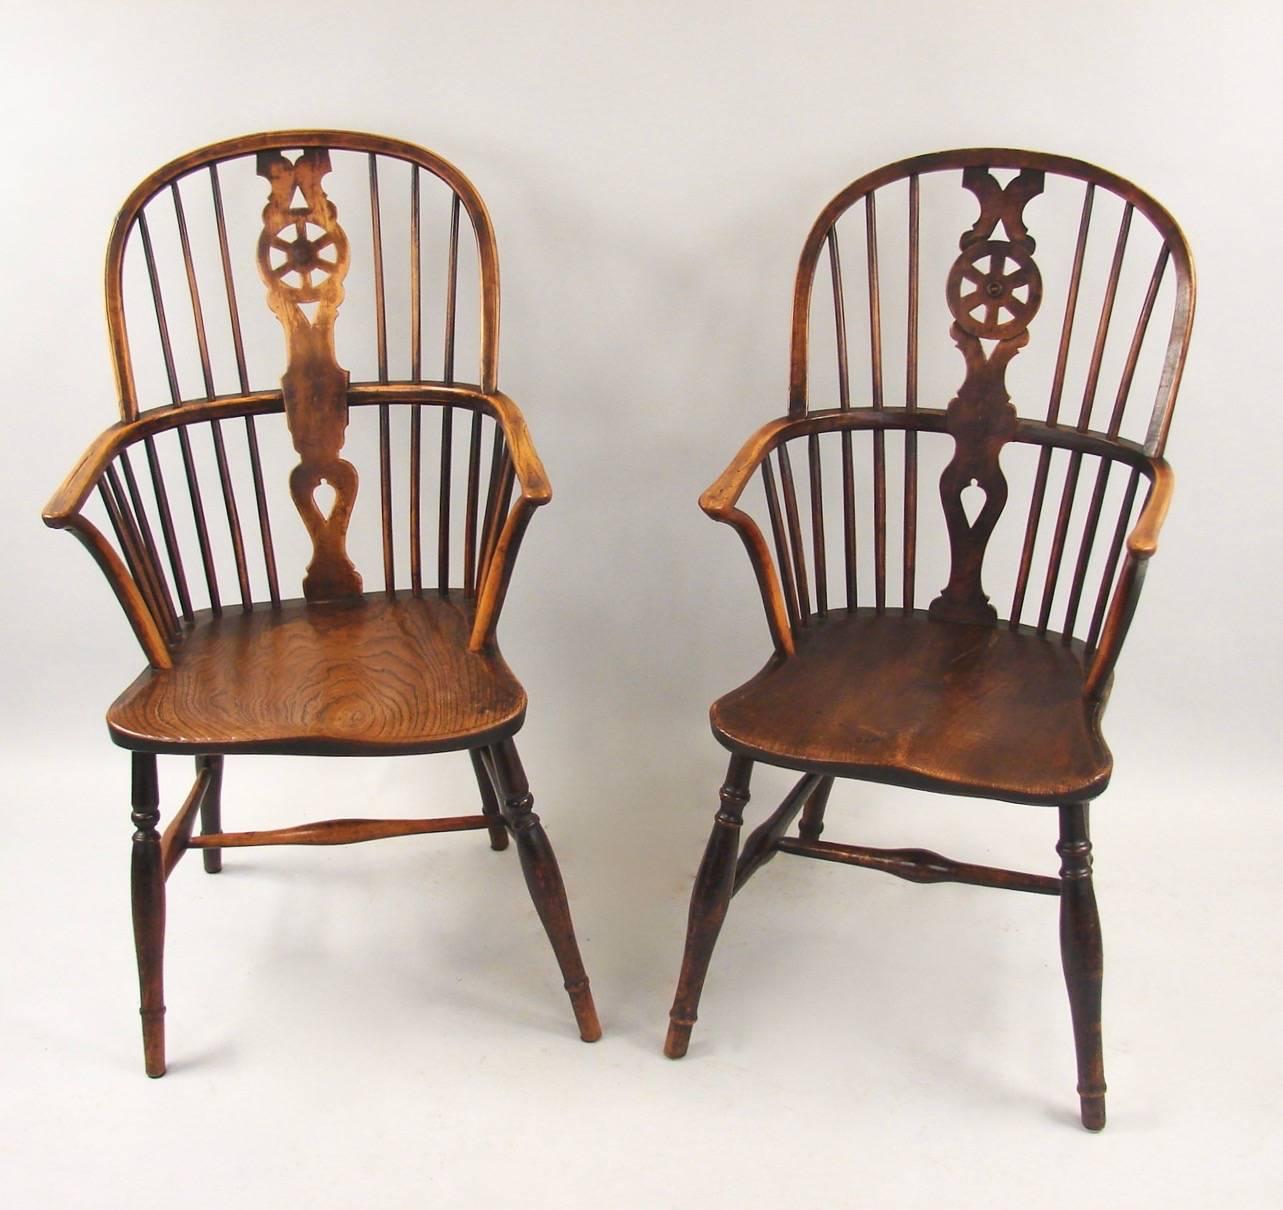 Elm Matched Pair of English Wheelback Windsor Armchairs